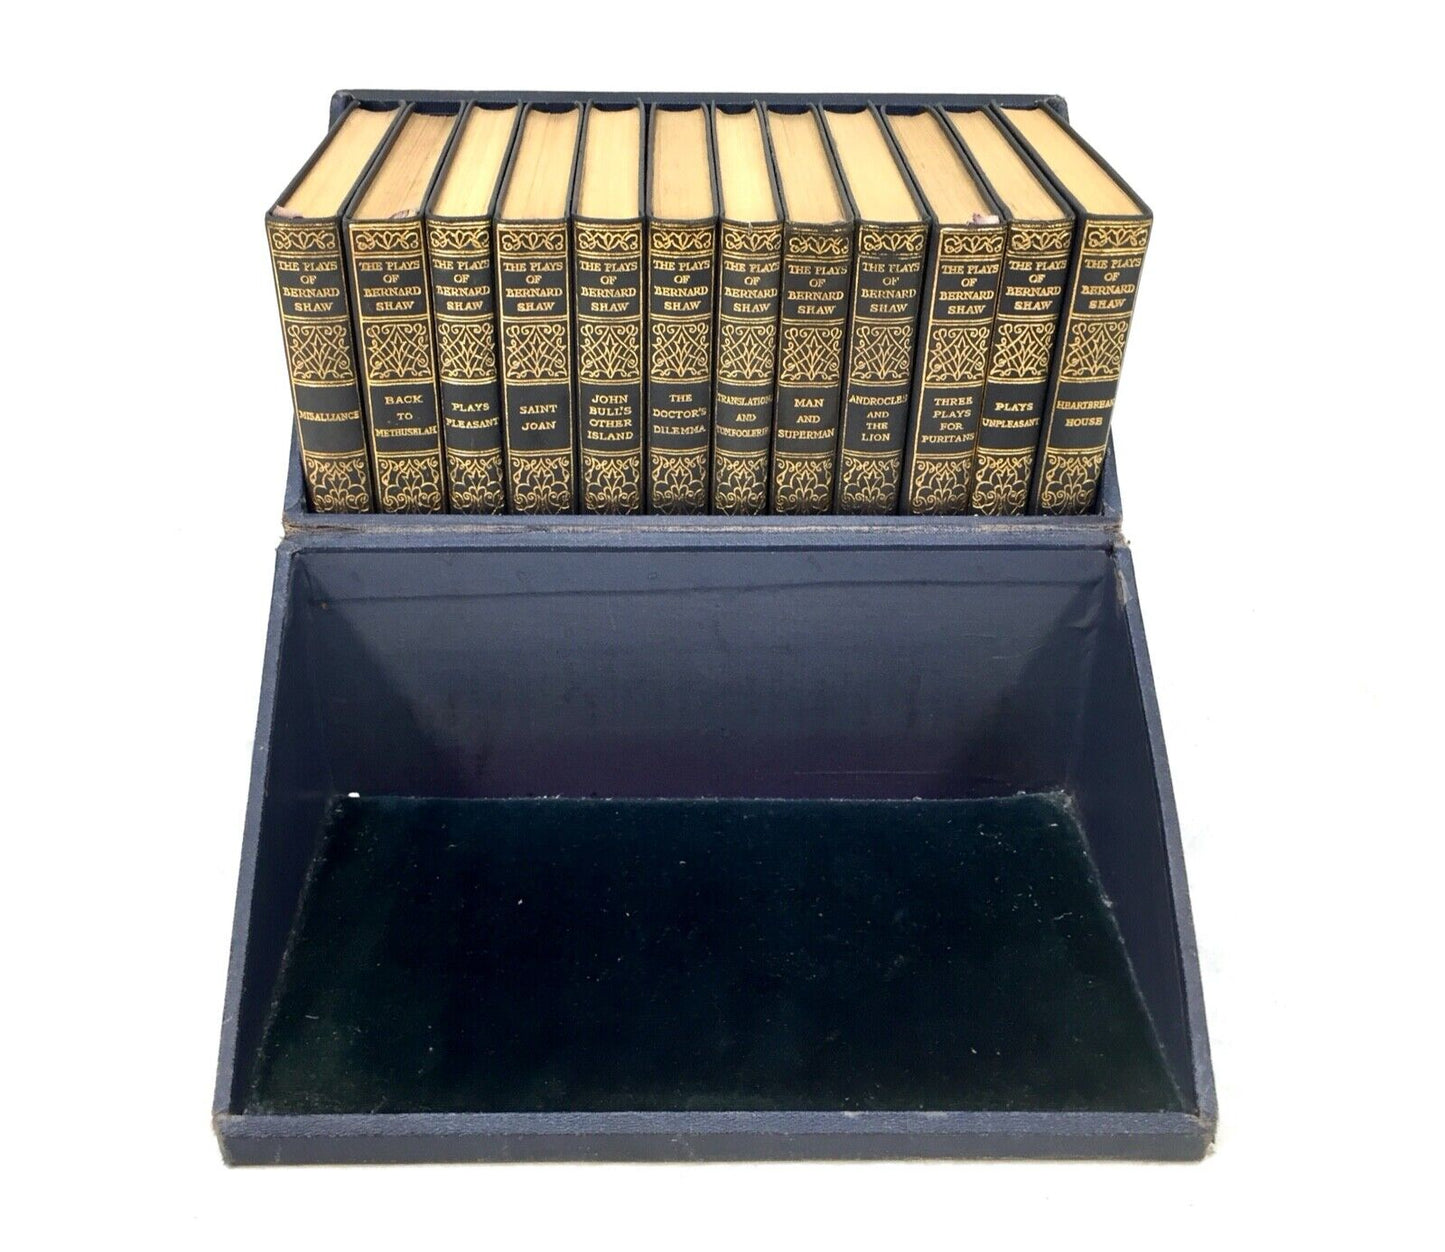 Antique 12 Volume Boxed Set of The Plays of Bernard Shaw / London Published 1929